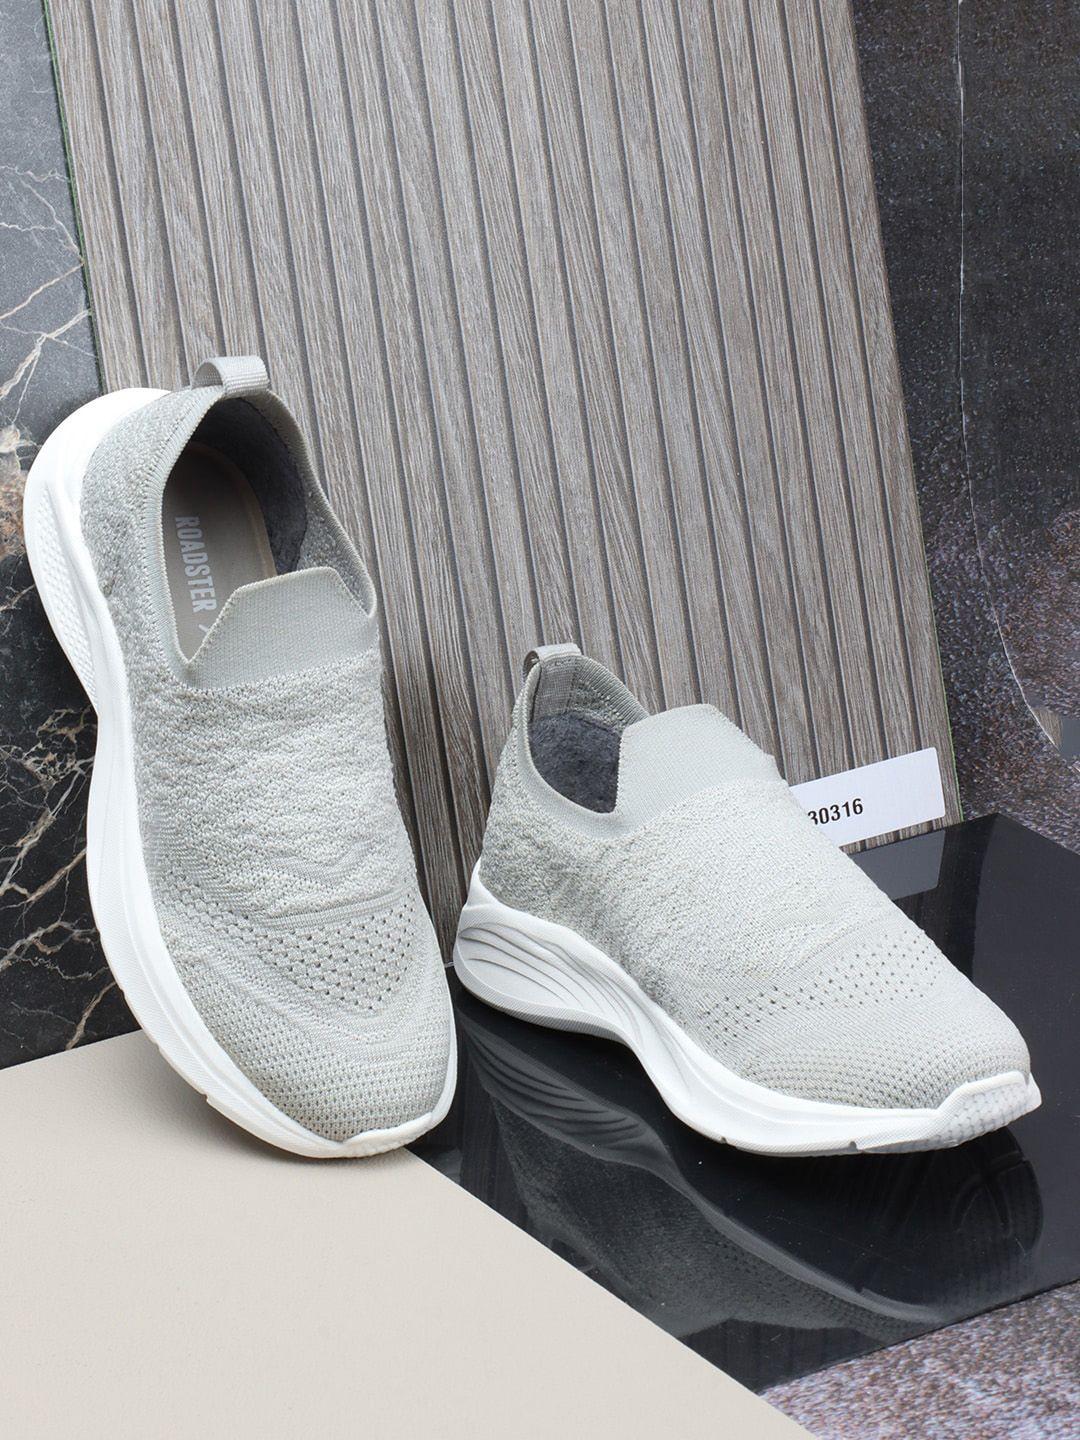 the roadster lifestyle co women textured casual slip-on sneakers